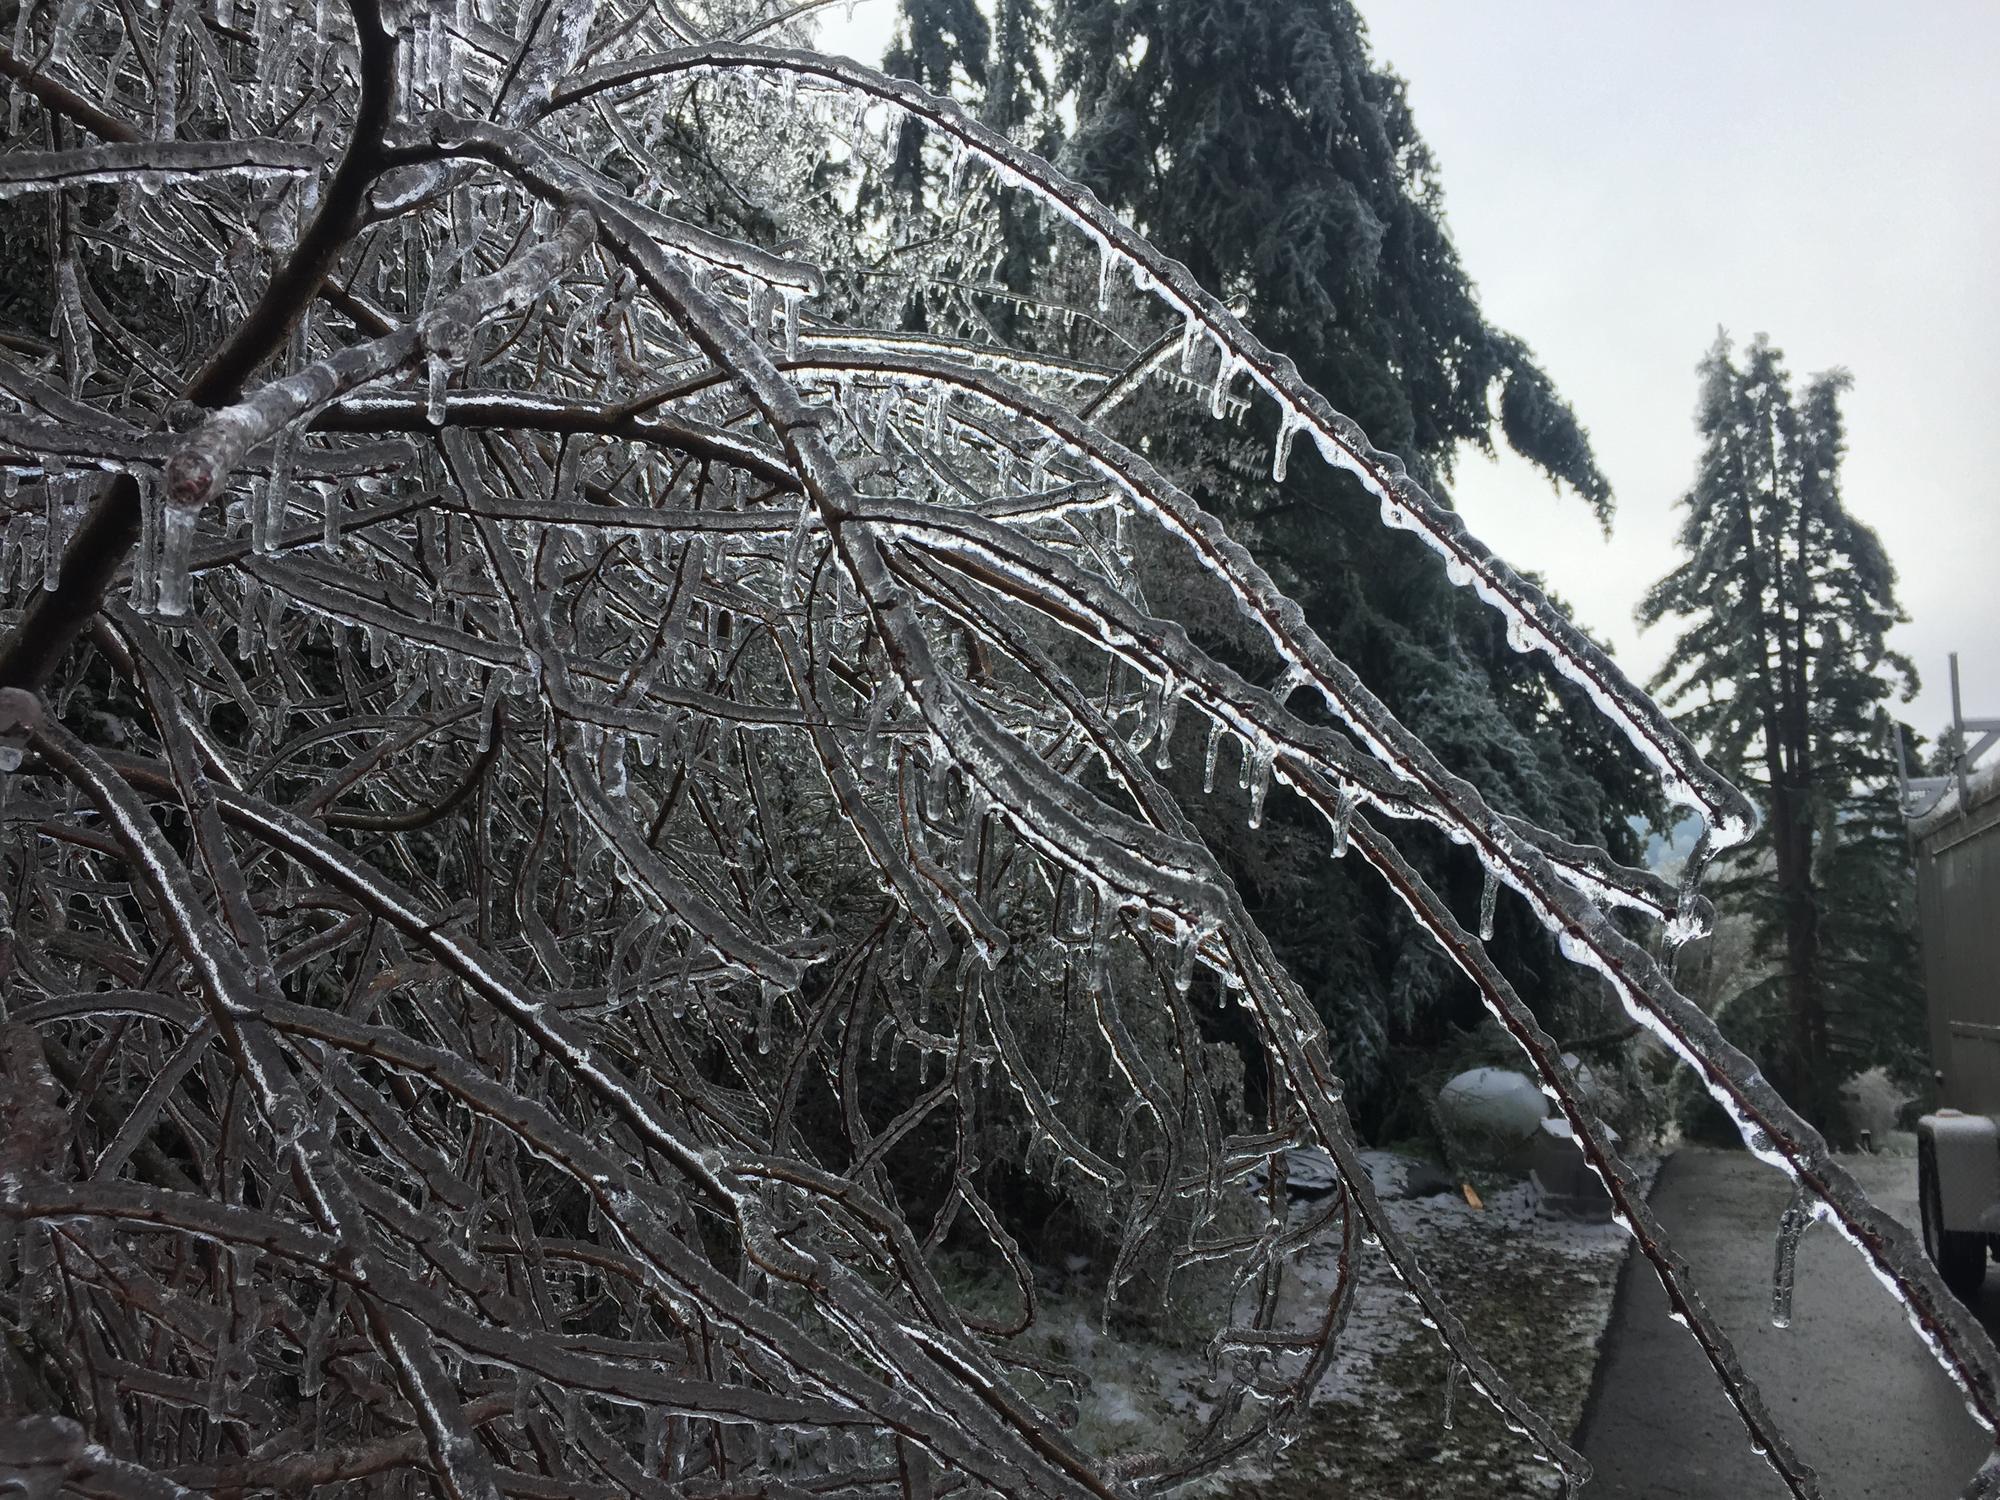 A closeup view of a portion of a tree encased in ice.